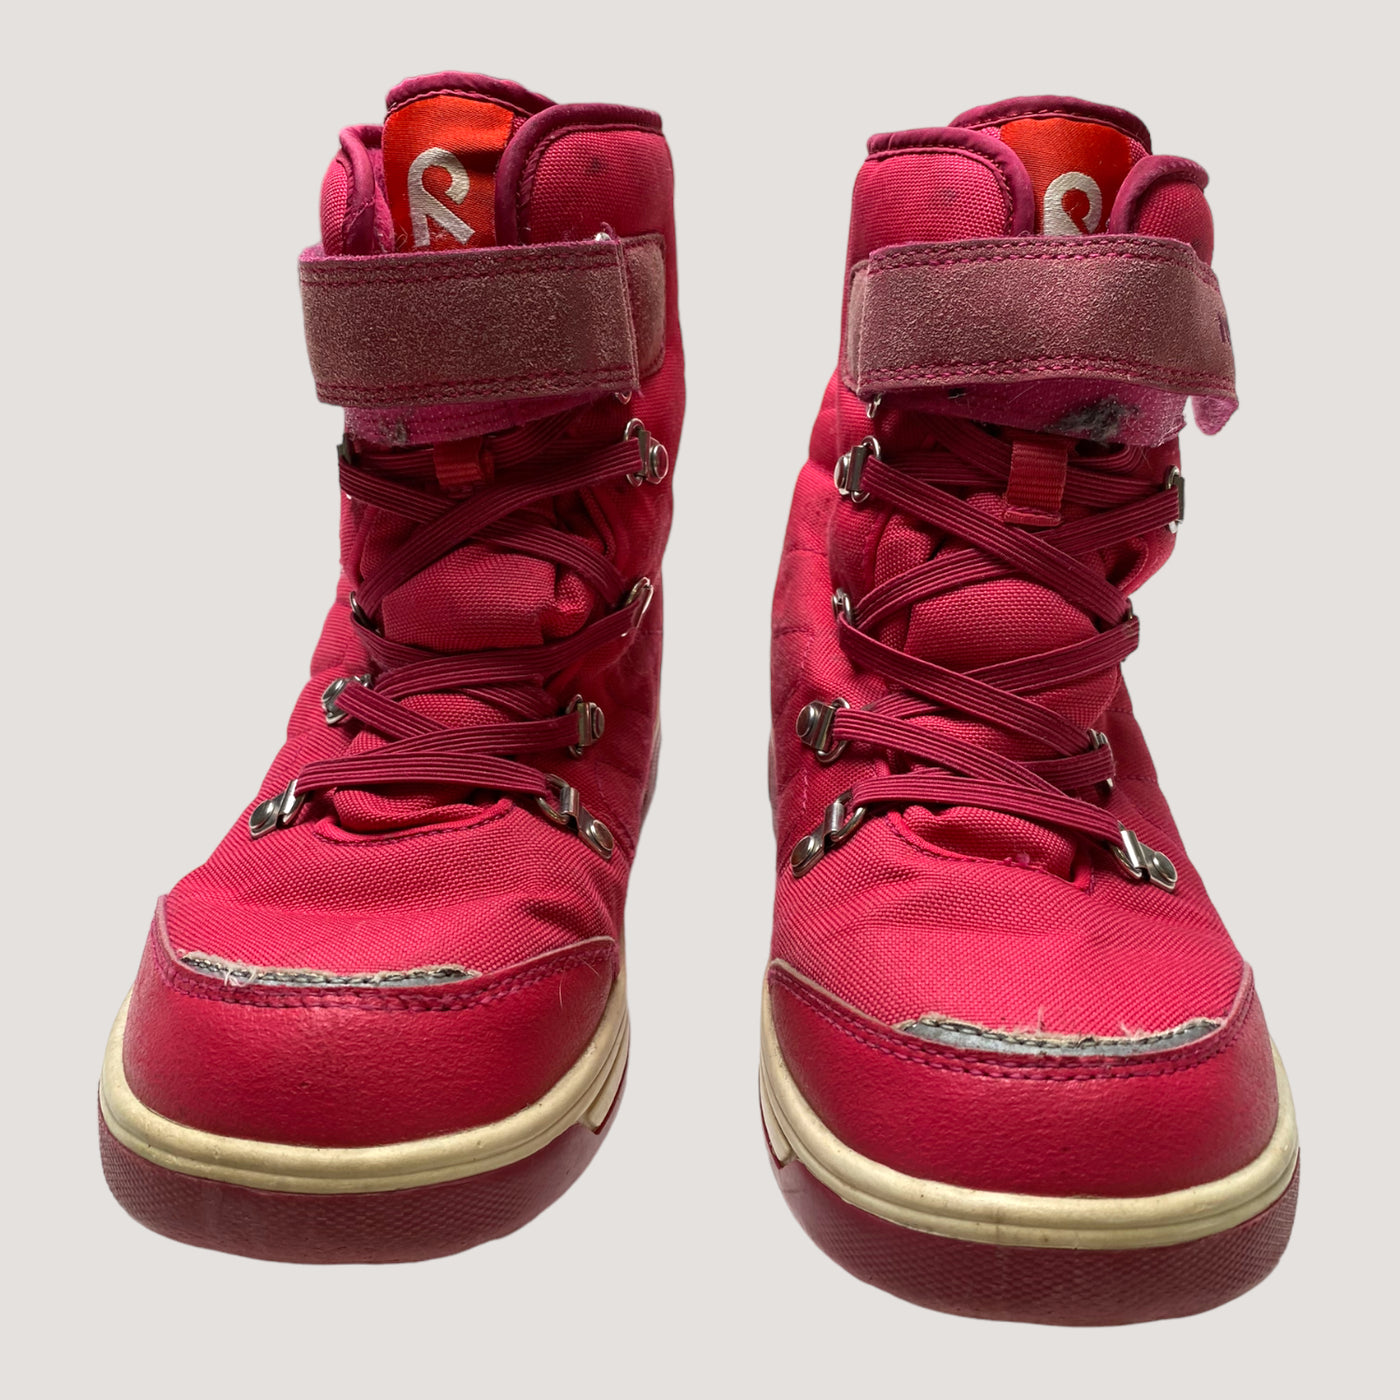 Reima padded winter boots, hot pink | 35